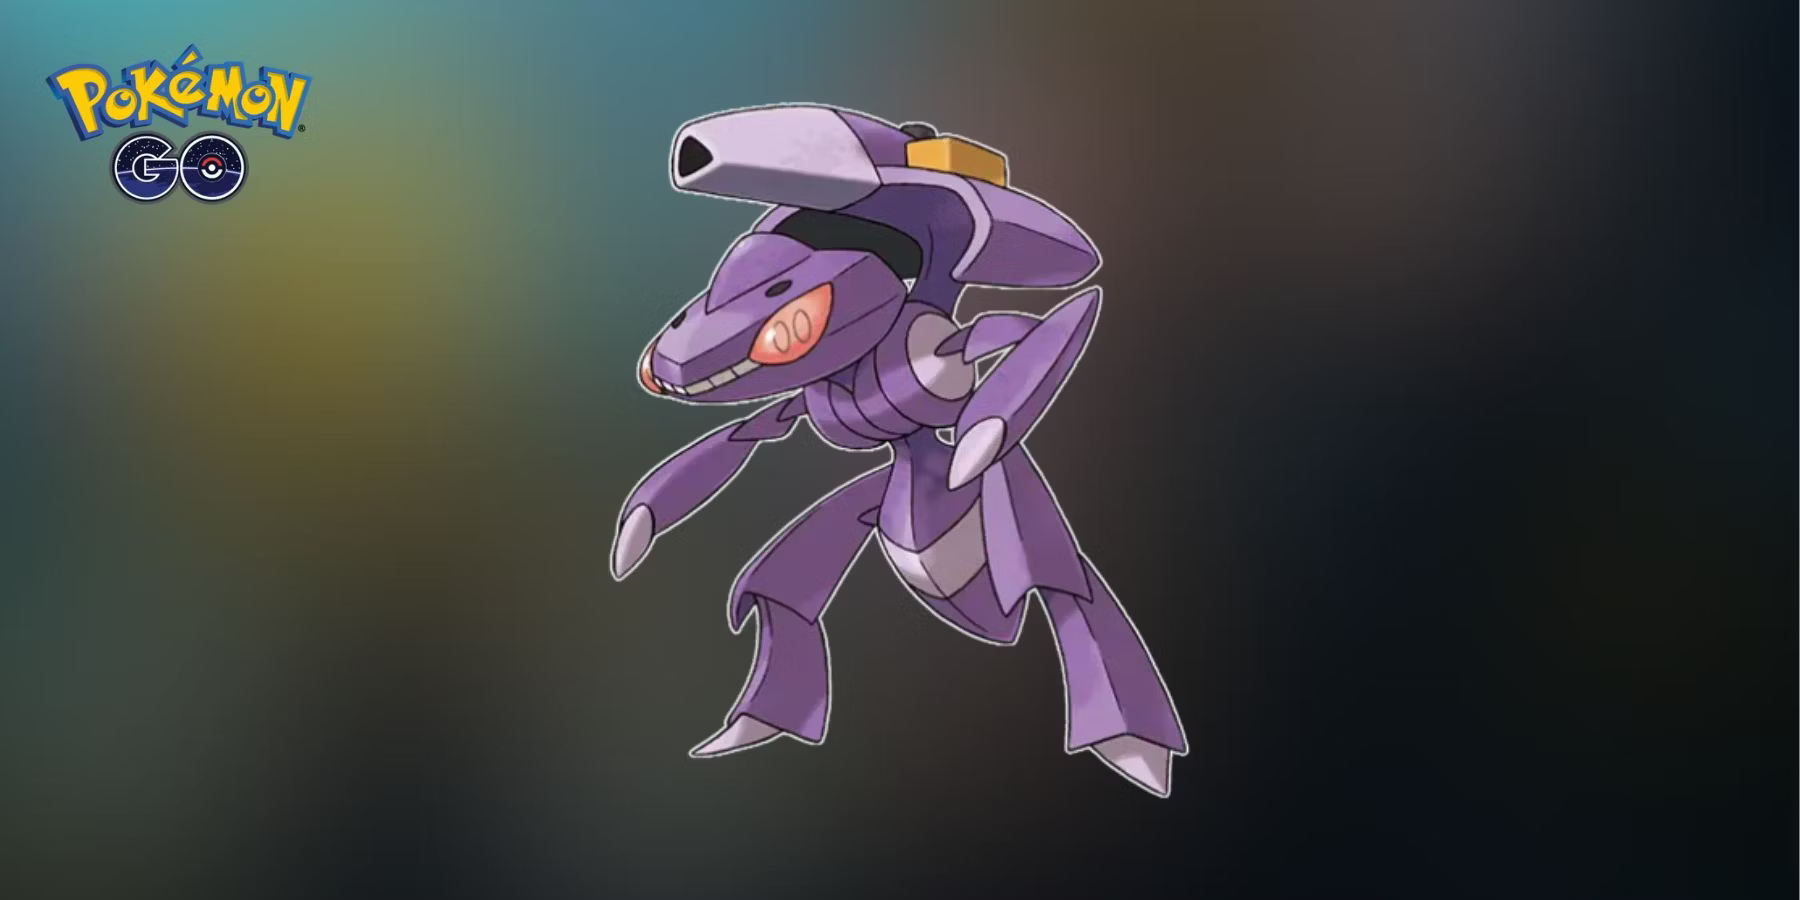 Pokemon GO Genesect (Burn) Raid Guide: Counters, Weaknesses, Shiny Genesect (Burn) & More